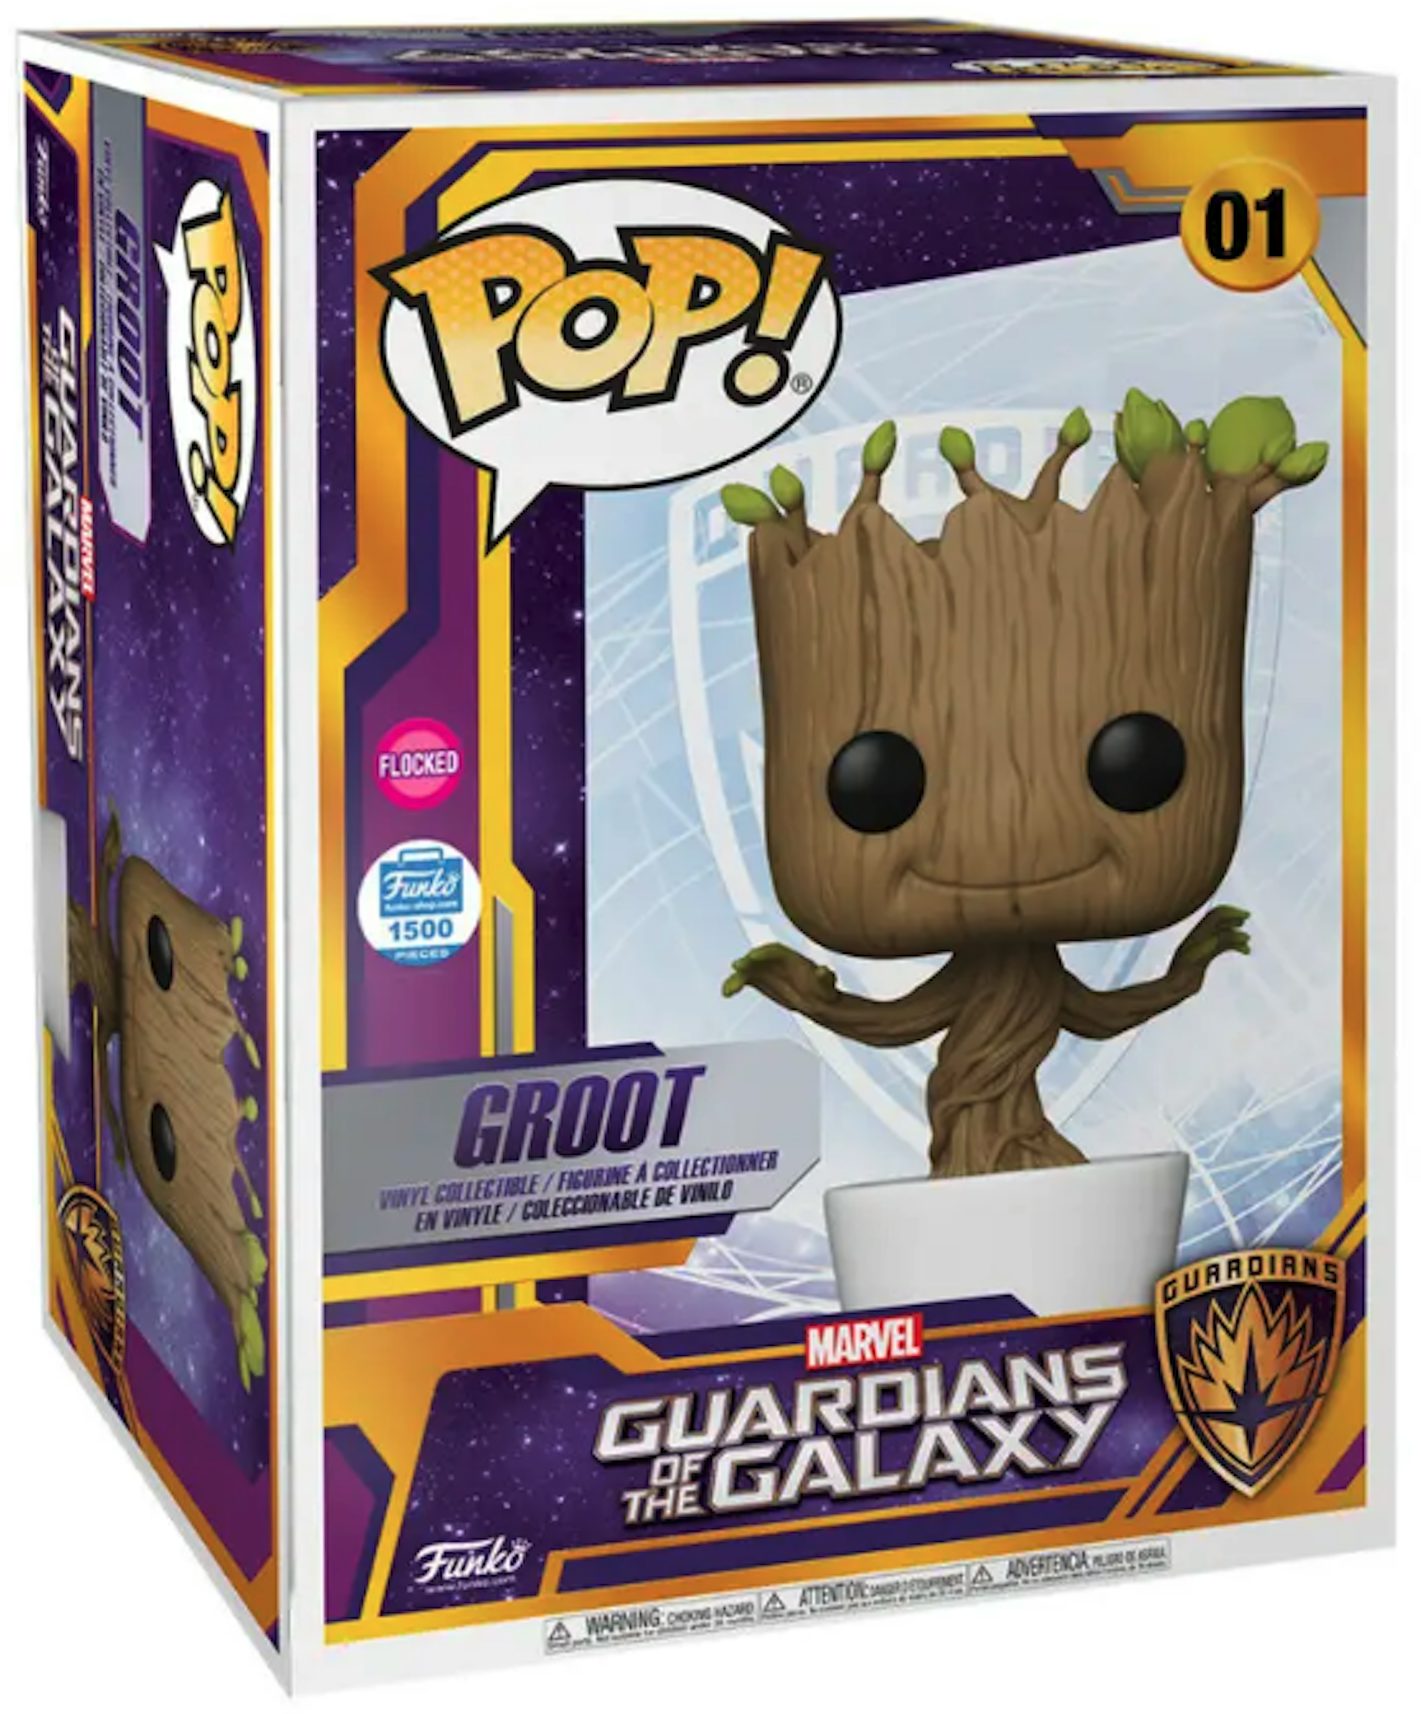 Golden State Warriors NBA Basketball Groot Marvel Guardians Of The